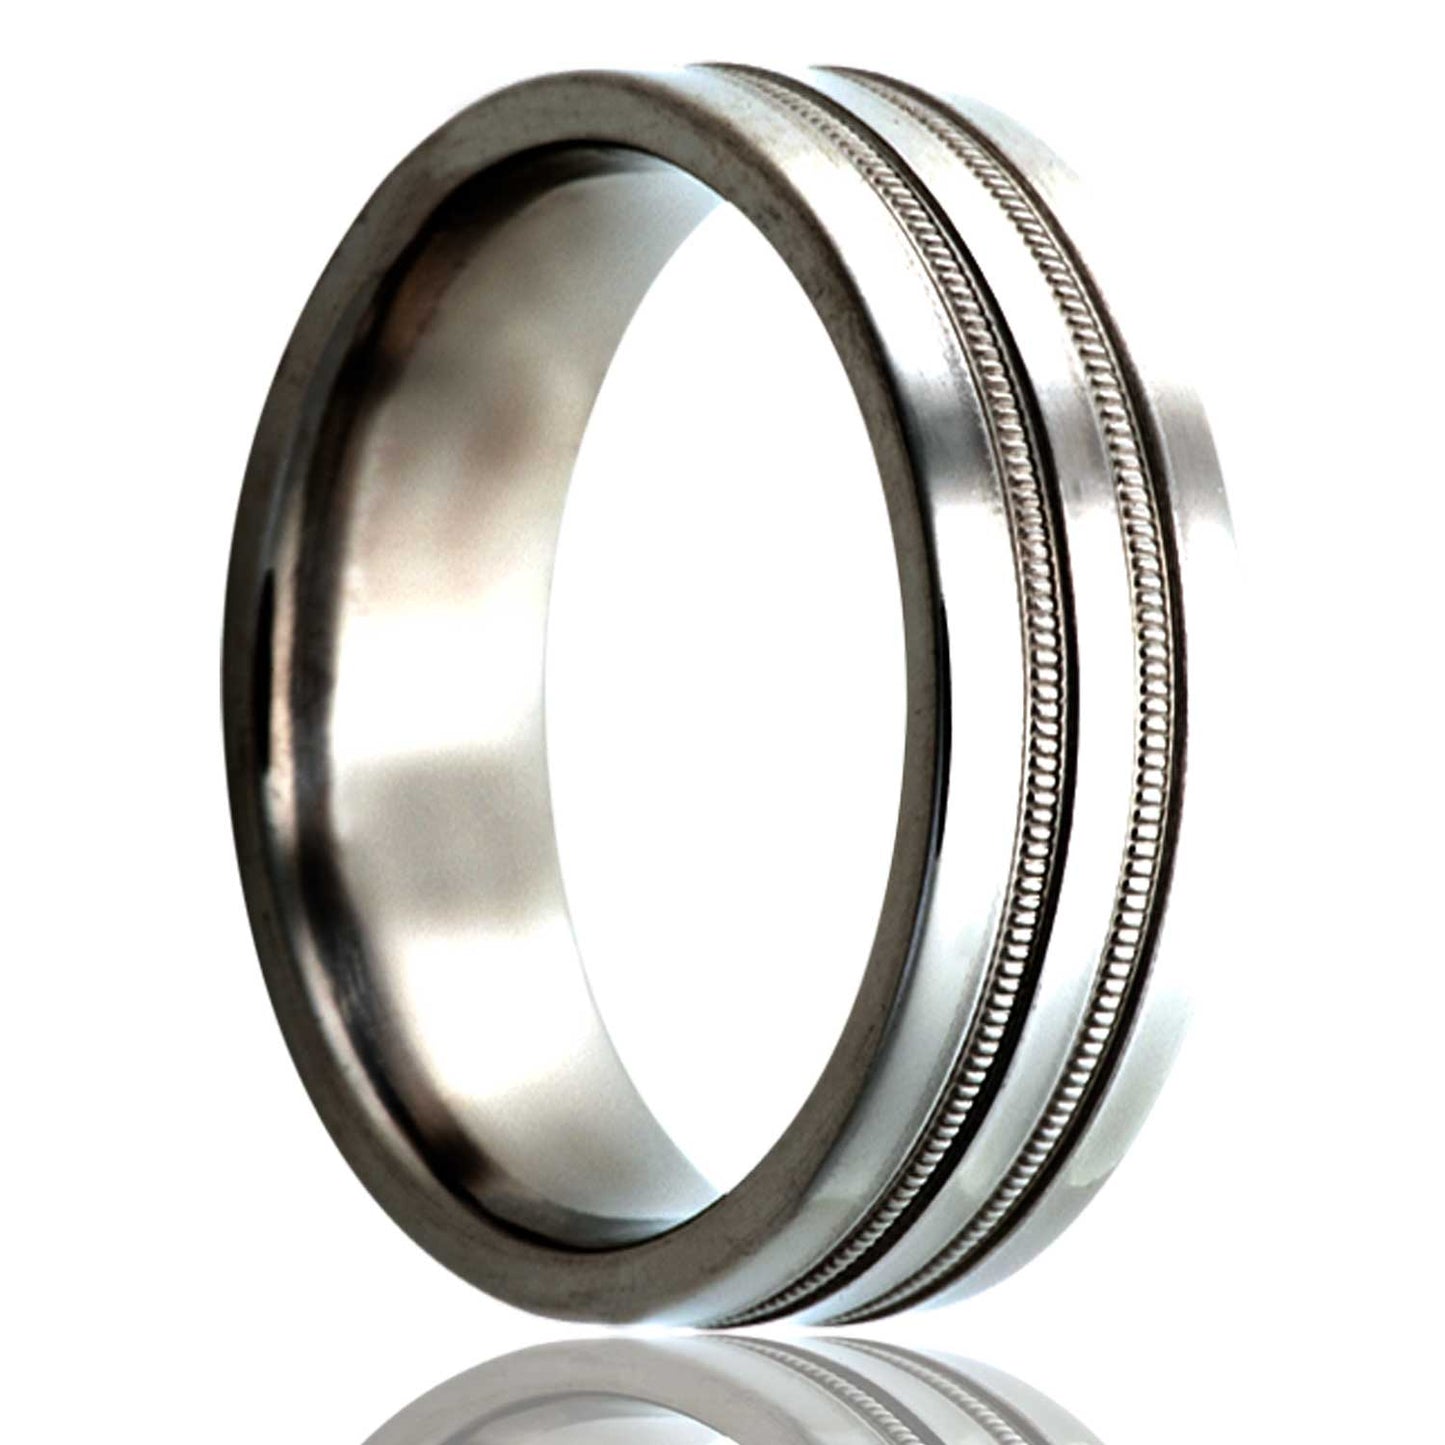 A titanium wedding band with dual grooves displayed on a neutral white background.